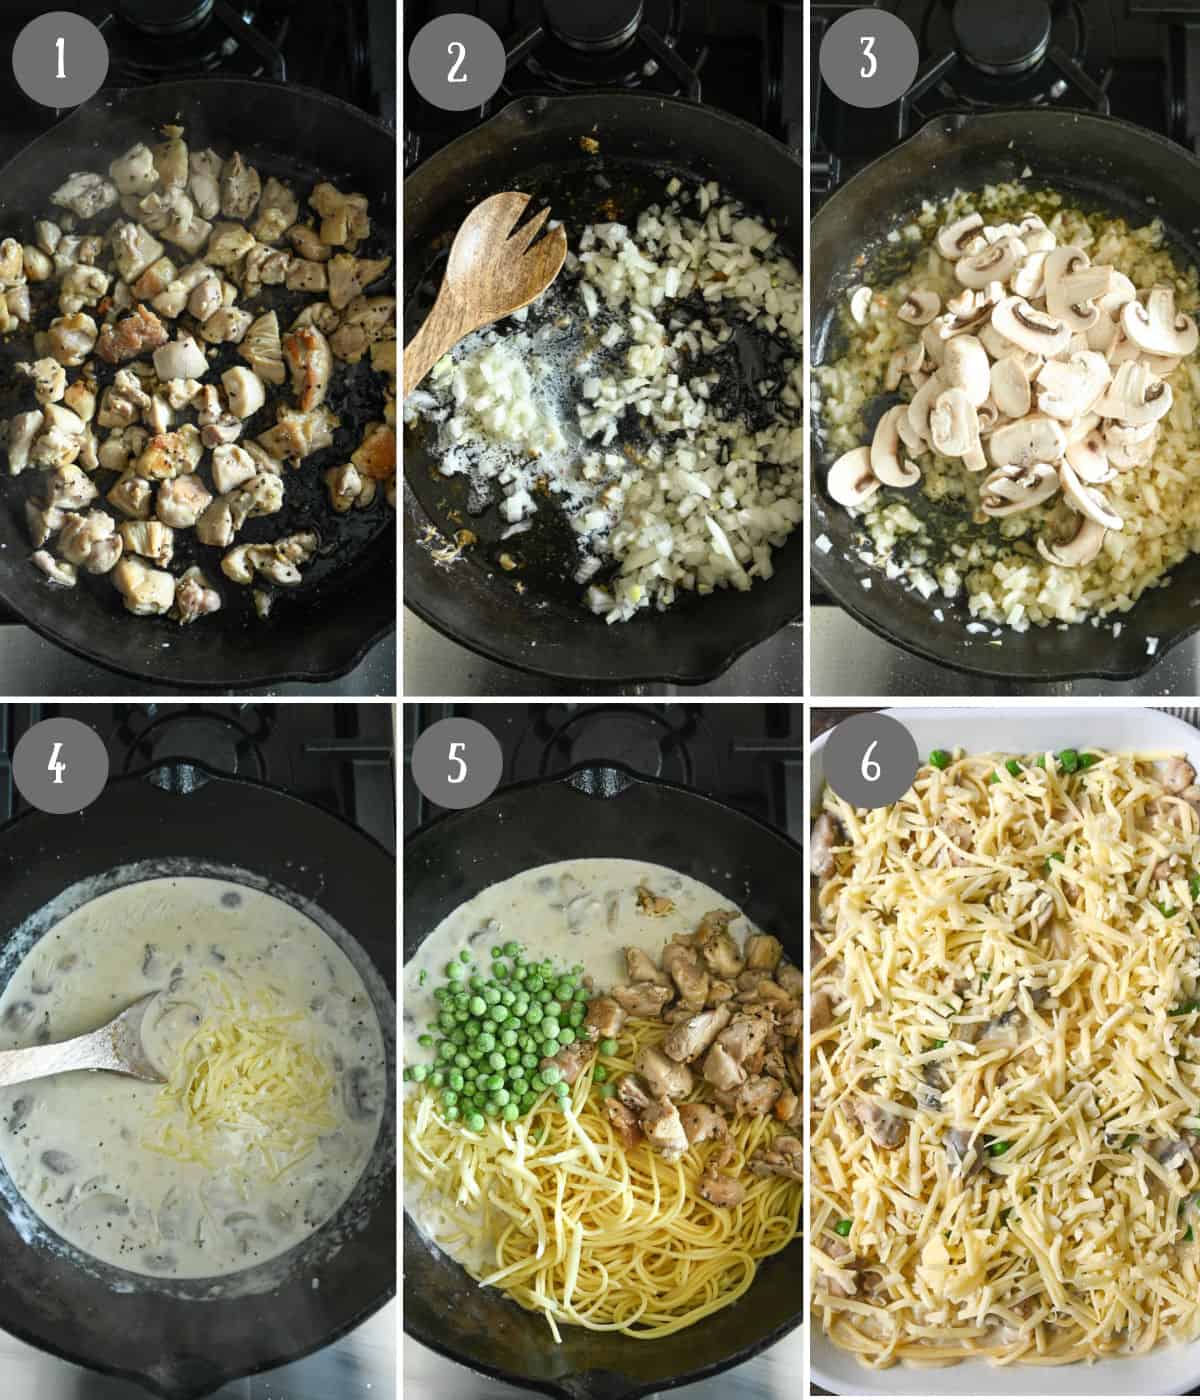 Six process photos. First one, diced chicken being sauteed in a pan. Second one, onions and garlic being cooked in the pan. Third one, sliced mushrooms added in. Fourth one liquid added in. Fifth one, the rest of the ingredients added in. Sixth one, everything added into a baking dish.